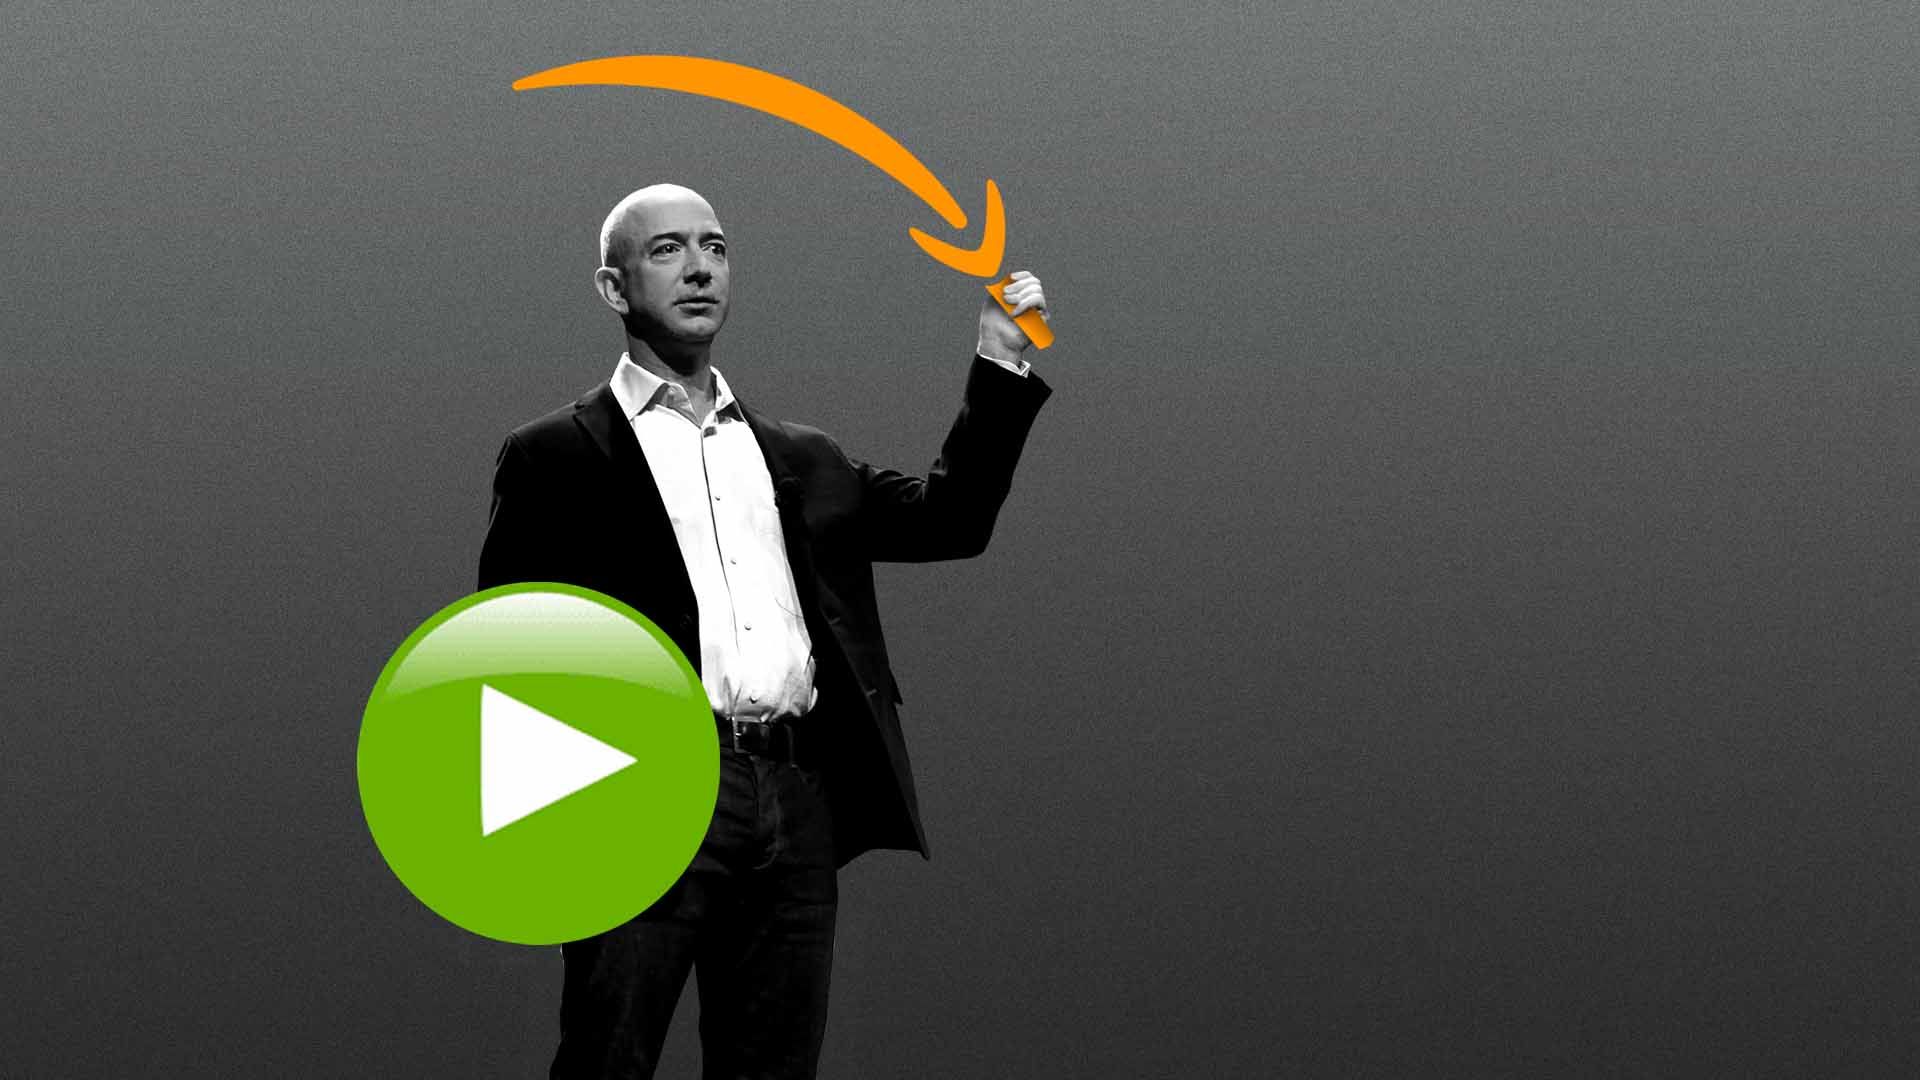 Illustration of Jeff Bezos wielding an Amazon logos as a sword and shield